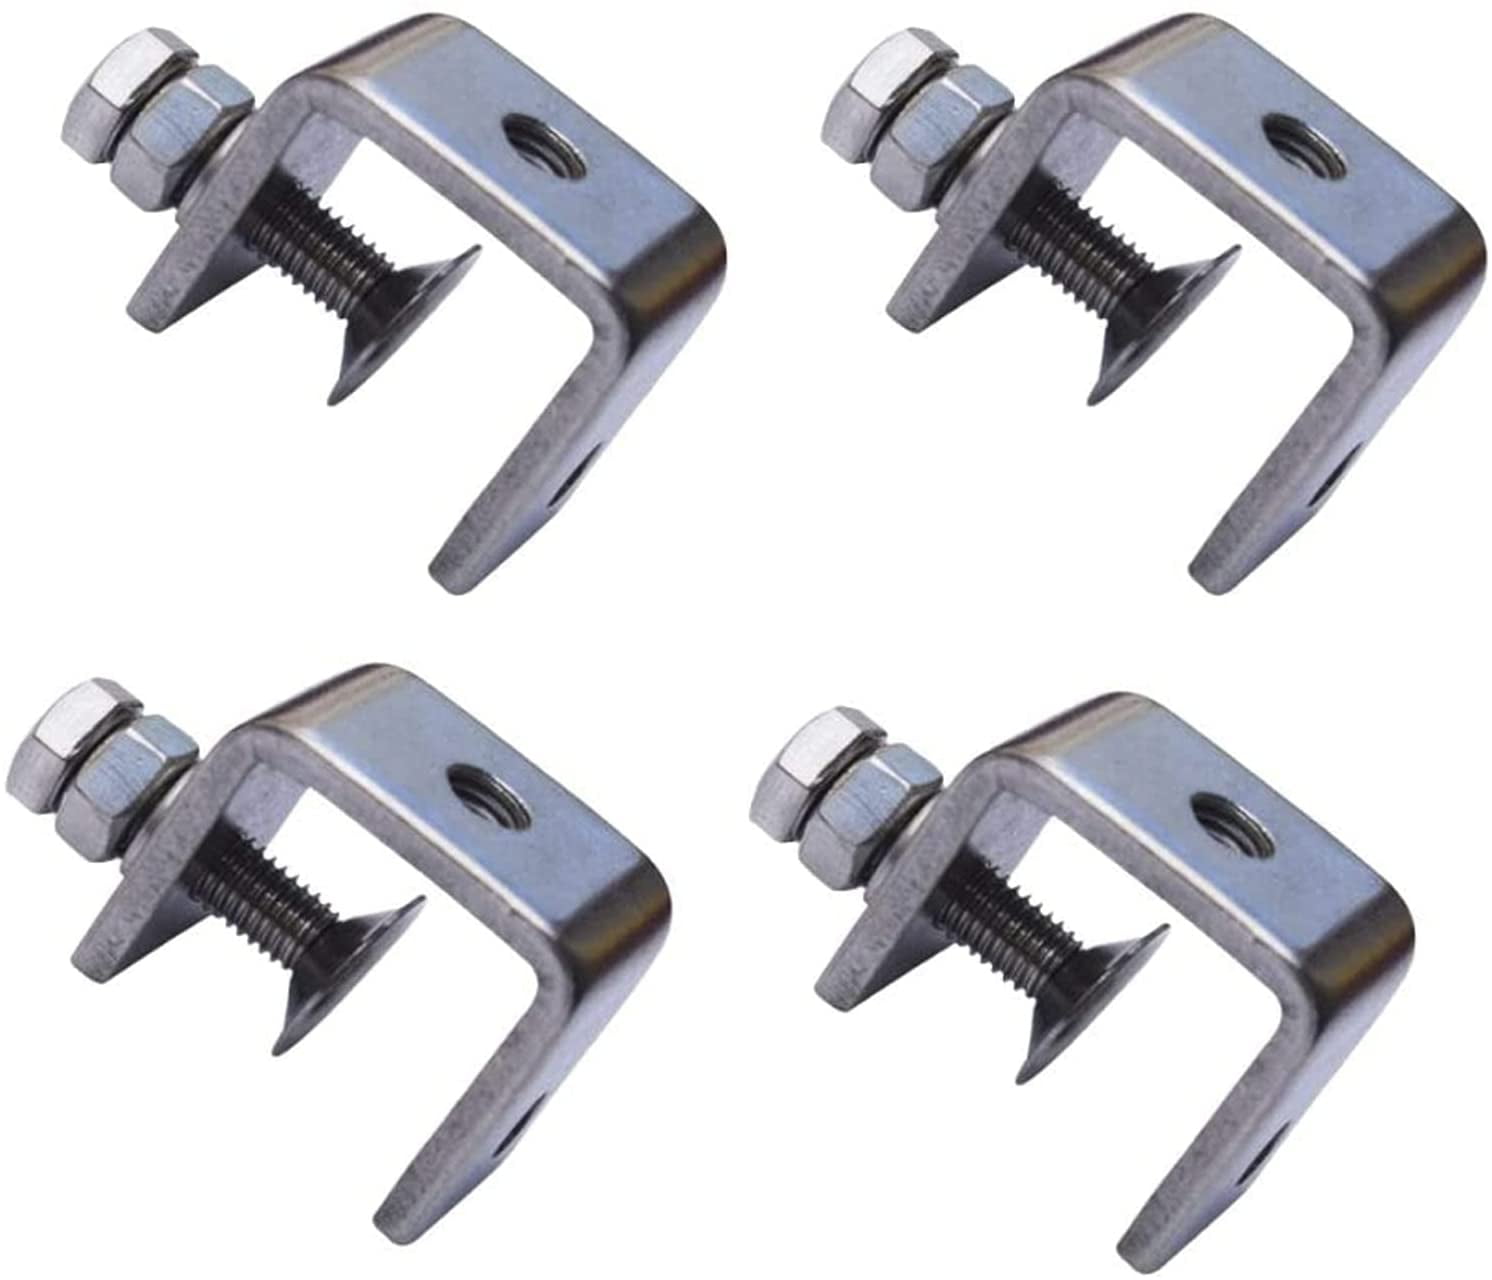 C Clamps Set 6-Inch C Clamp Heavy Duty C Clamps for DIY Carpentry Woodwork Building 6 2pcs 